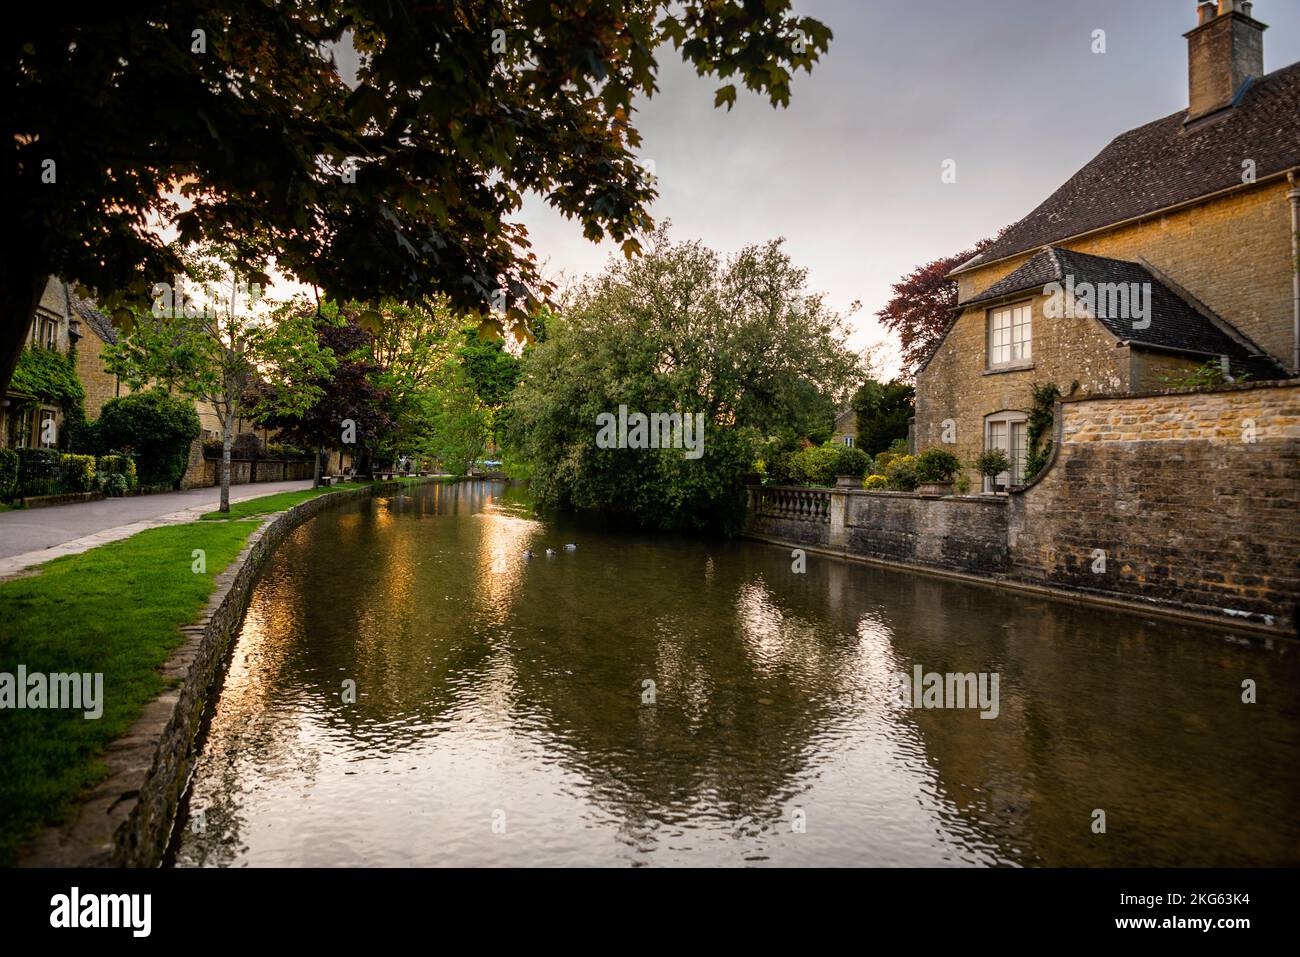 Stone cottage and balustrade on the River Windrush in Bourton-on-the-Water in the Cotswolds, England, a UK Conservation Area. Stock Photo